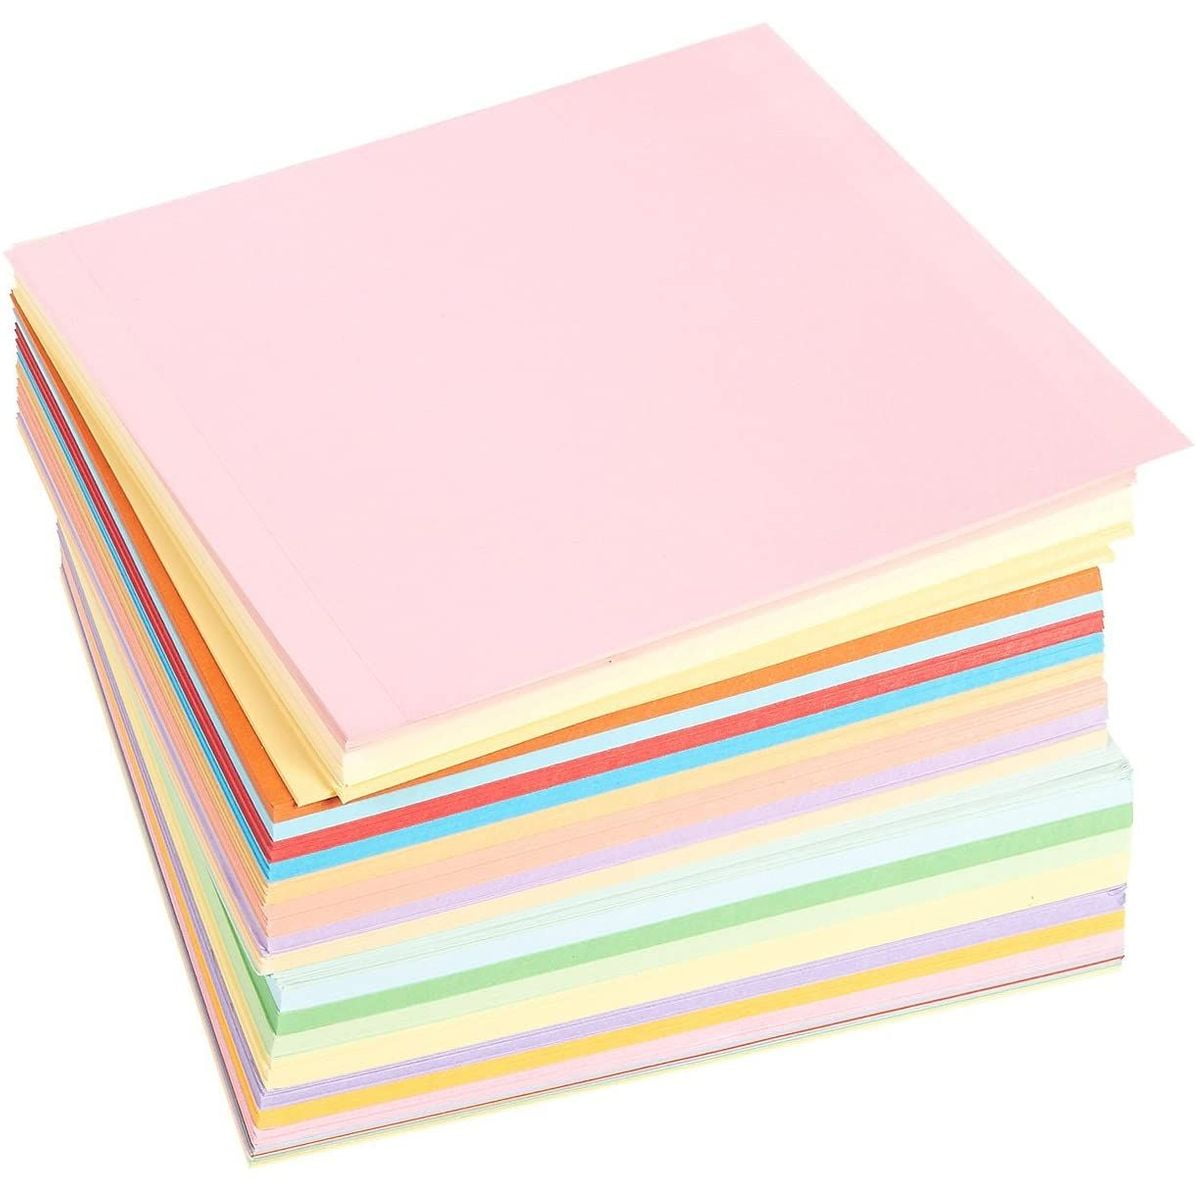 PAPUS Origami Paper 200 Sheets 20 Colors Double Sided Colors 6inch Square Sheet for Kids